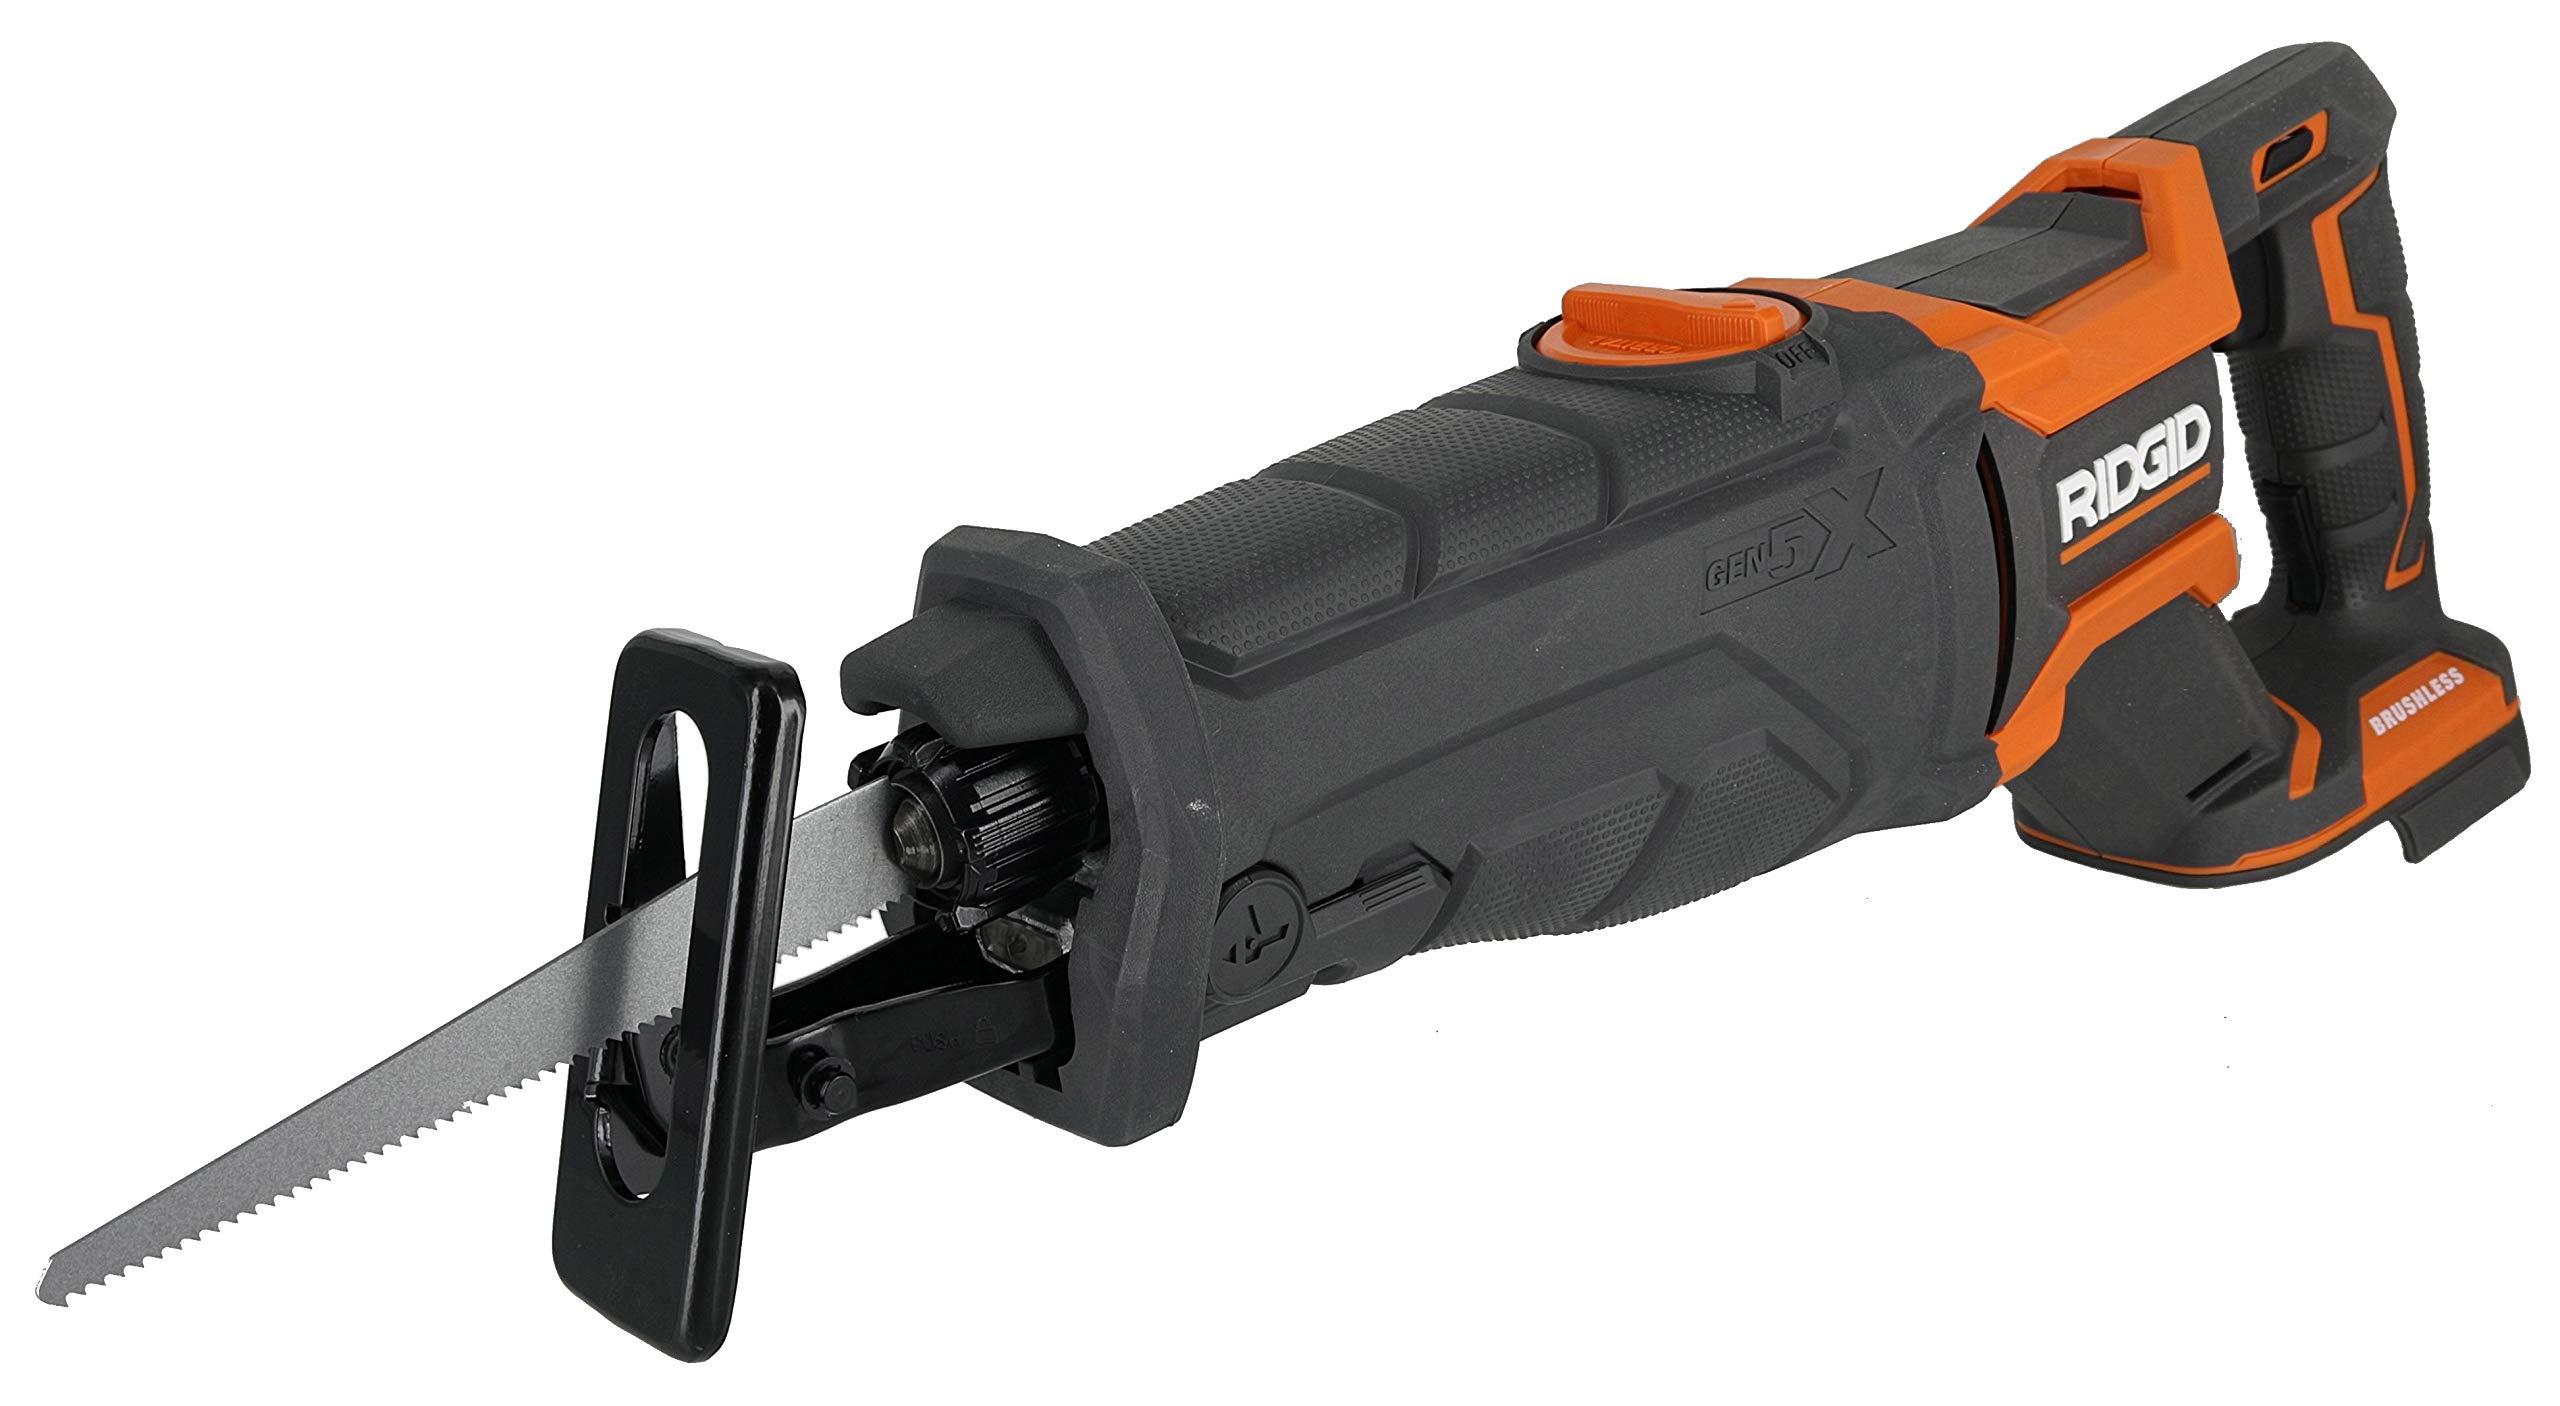 Ridgid 18-Volt OCTANE Lithium-Ion Cordless Brushless Reciprocating Saw (Tool-Only) with Reciprocating Saw Blade